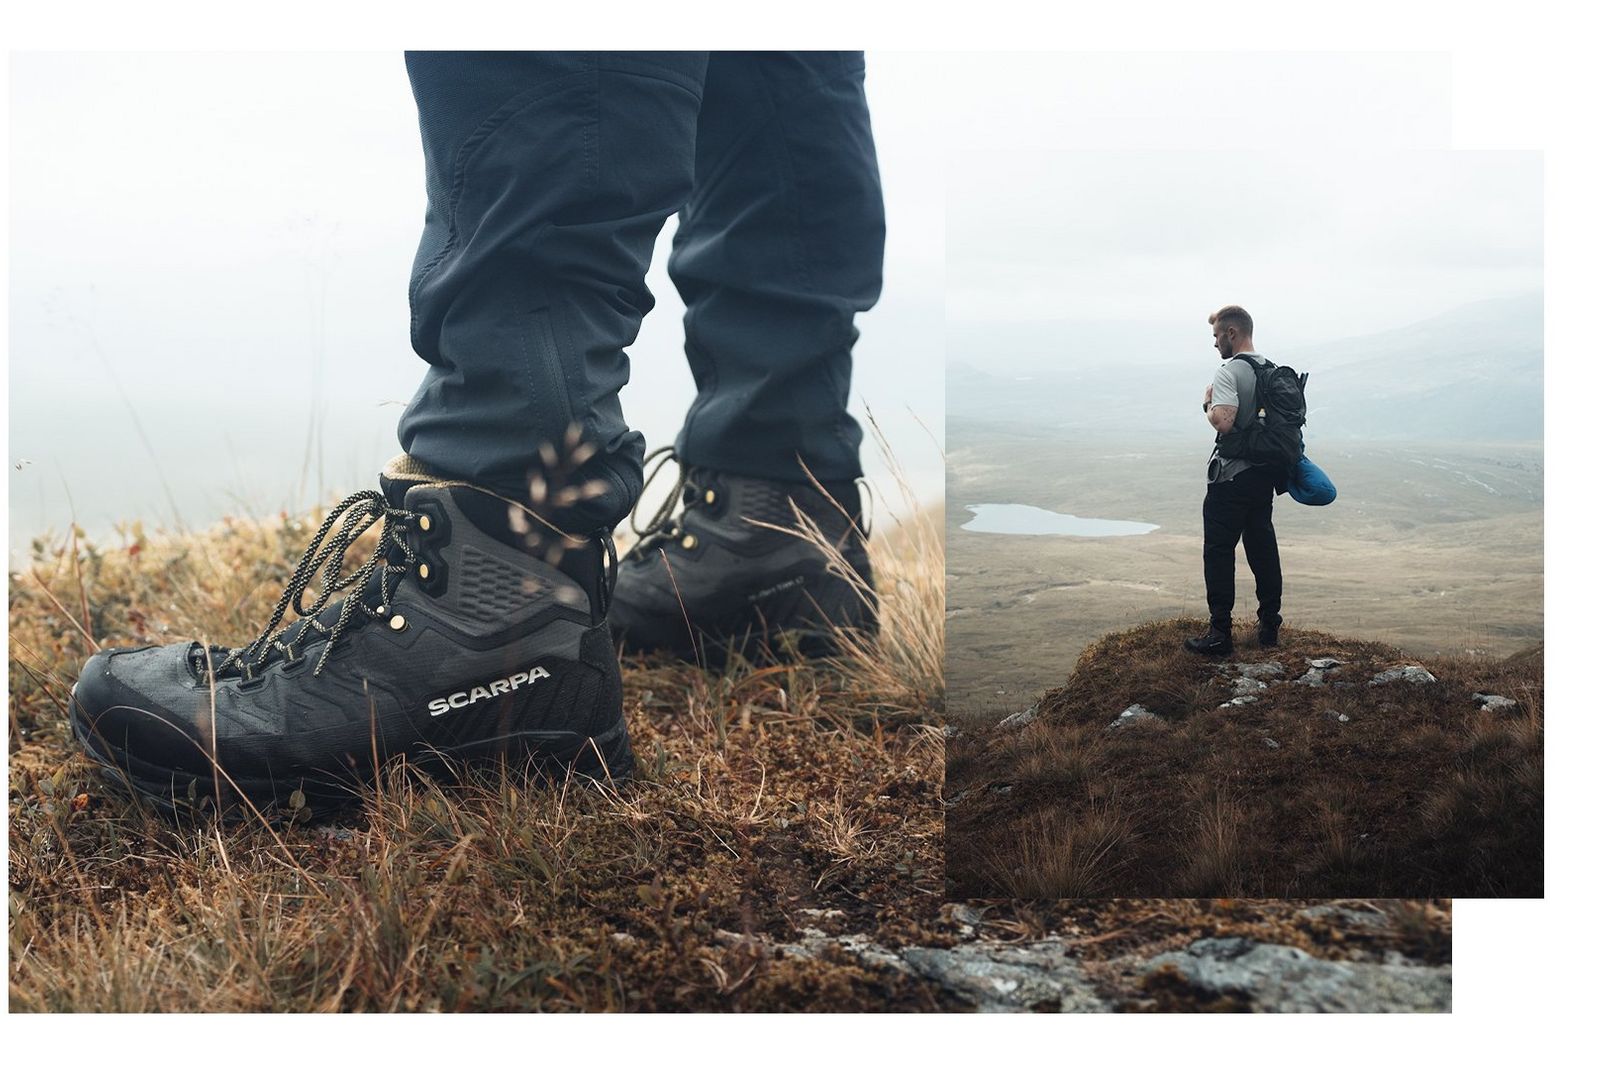 A close up of a man wearing the Scarpa Rush Trk LT Hiking Boots on a wet walking trail